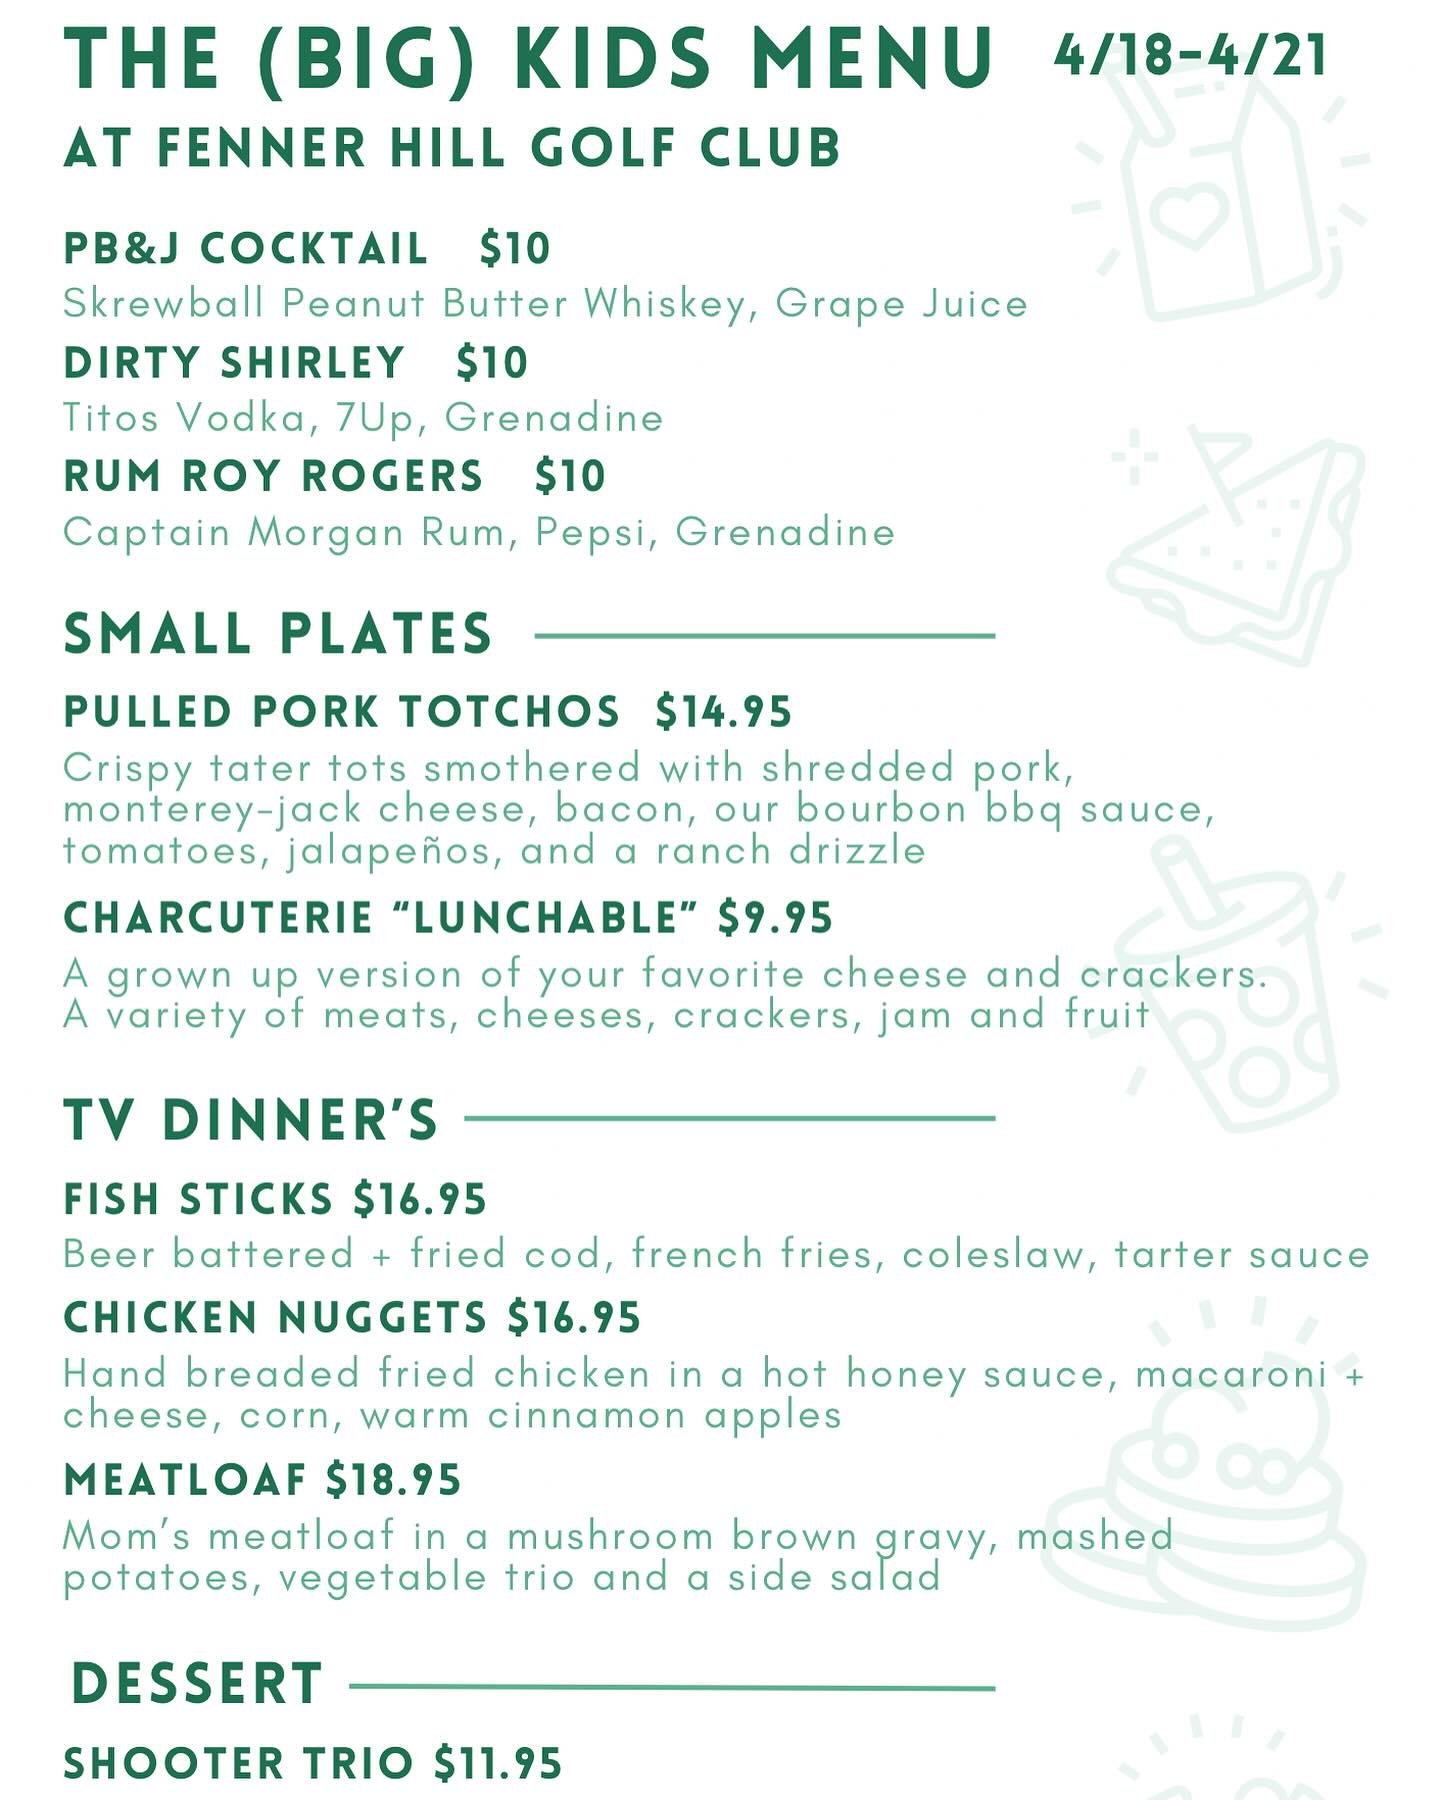 This week&rsquo;s menu is for the (big) kid in all of us!

It&rsquo;s school vacation week and who says the kids get to have all the fun? We&rsquo;re bringing you grown up versions of some of your childhood favorites all weekend long!

💚Menu kicks o